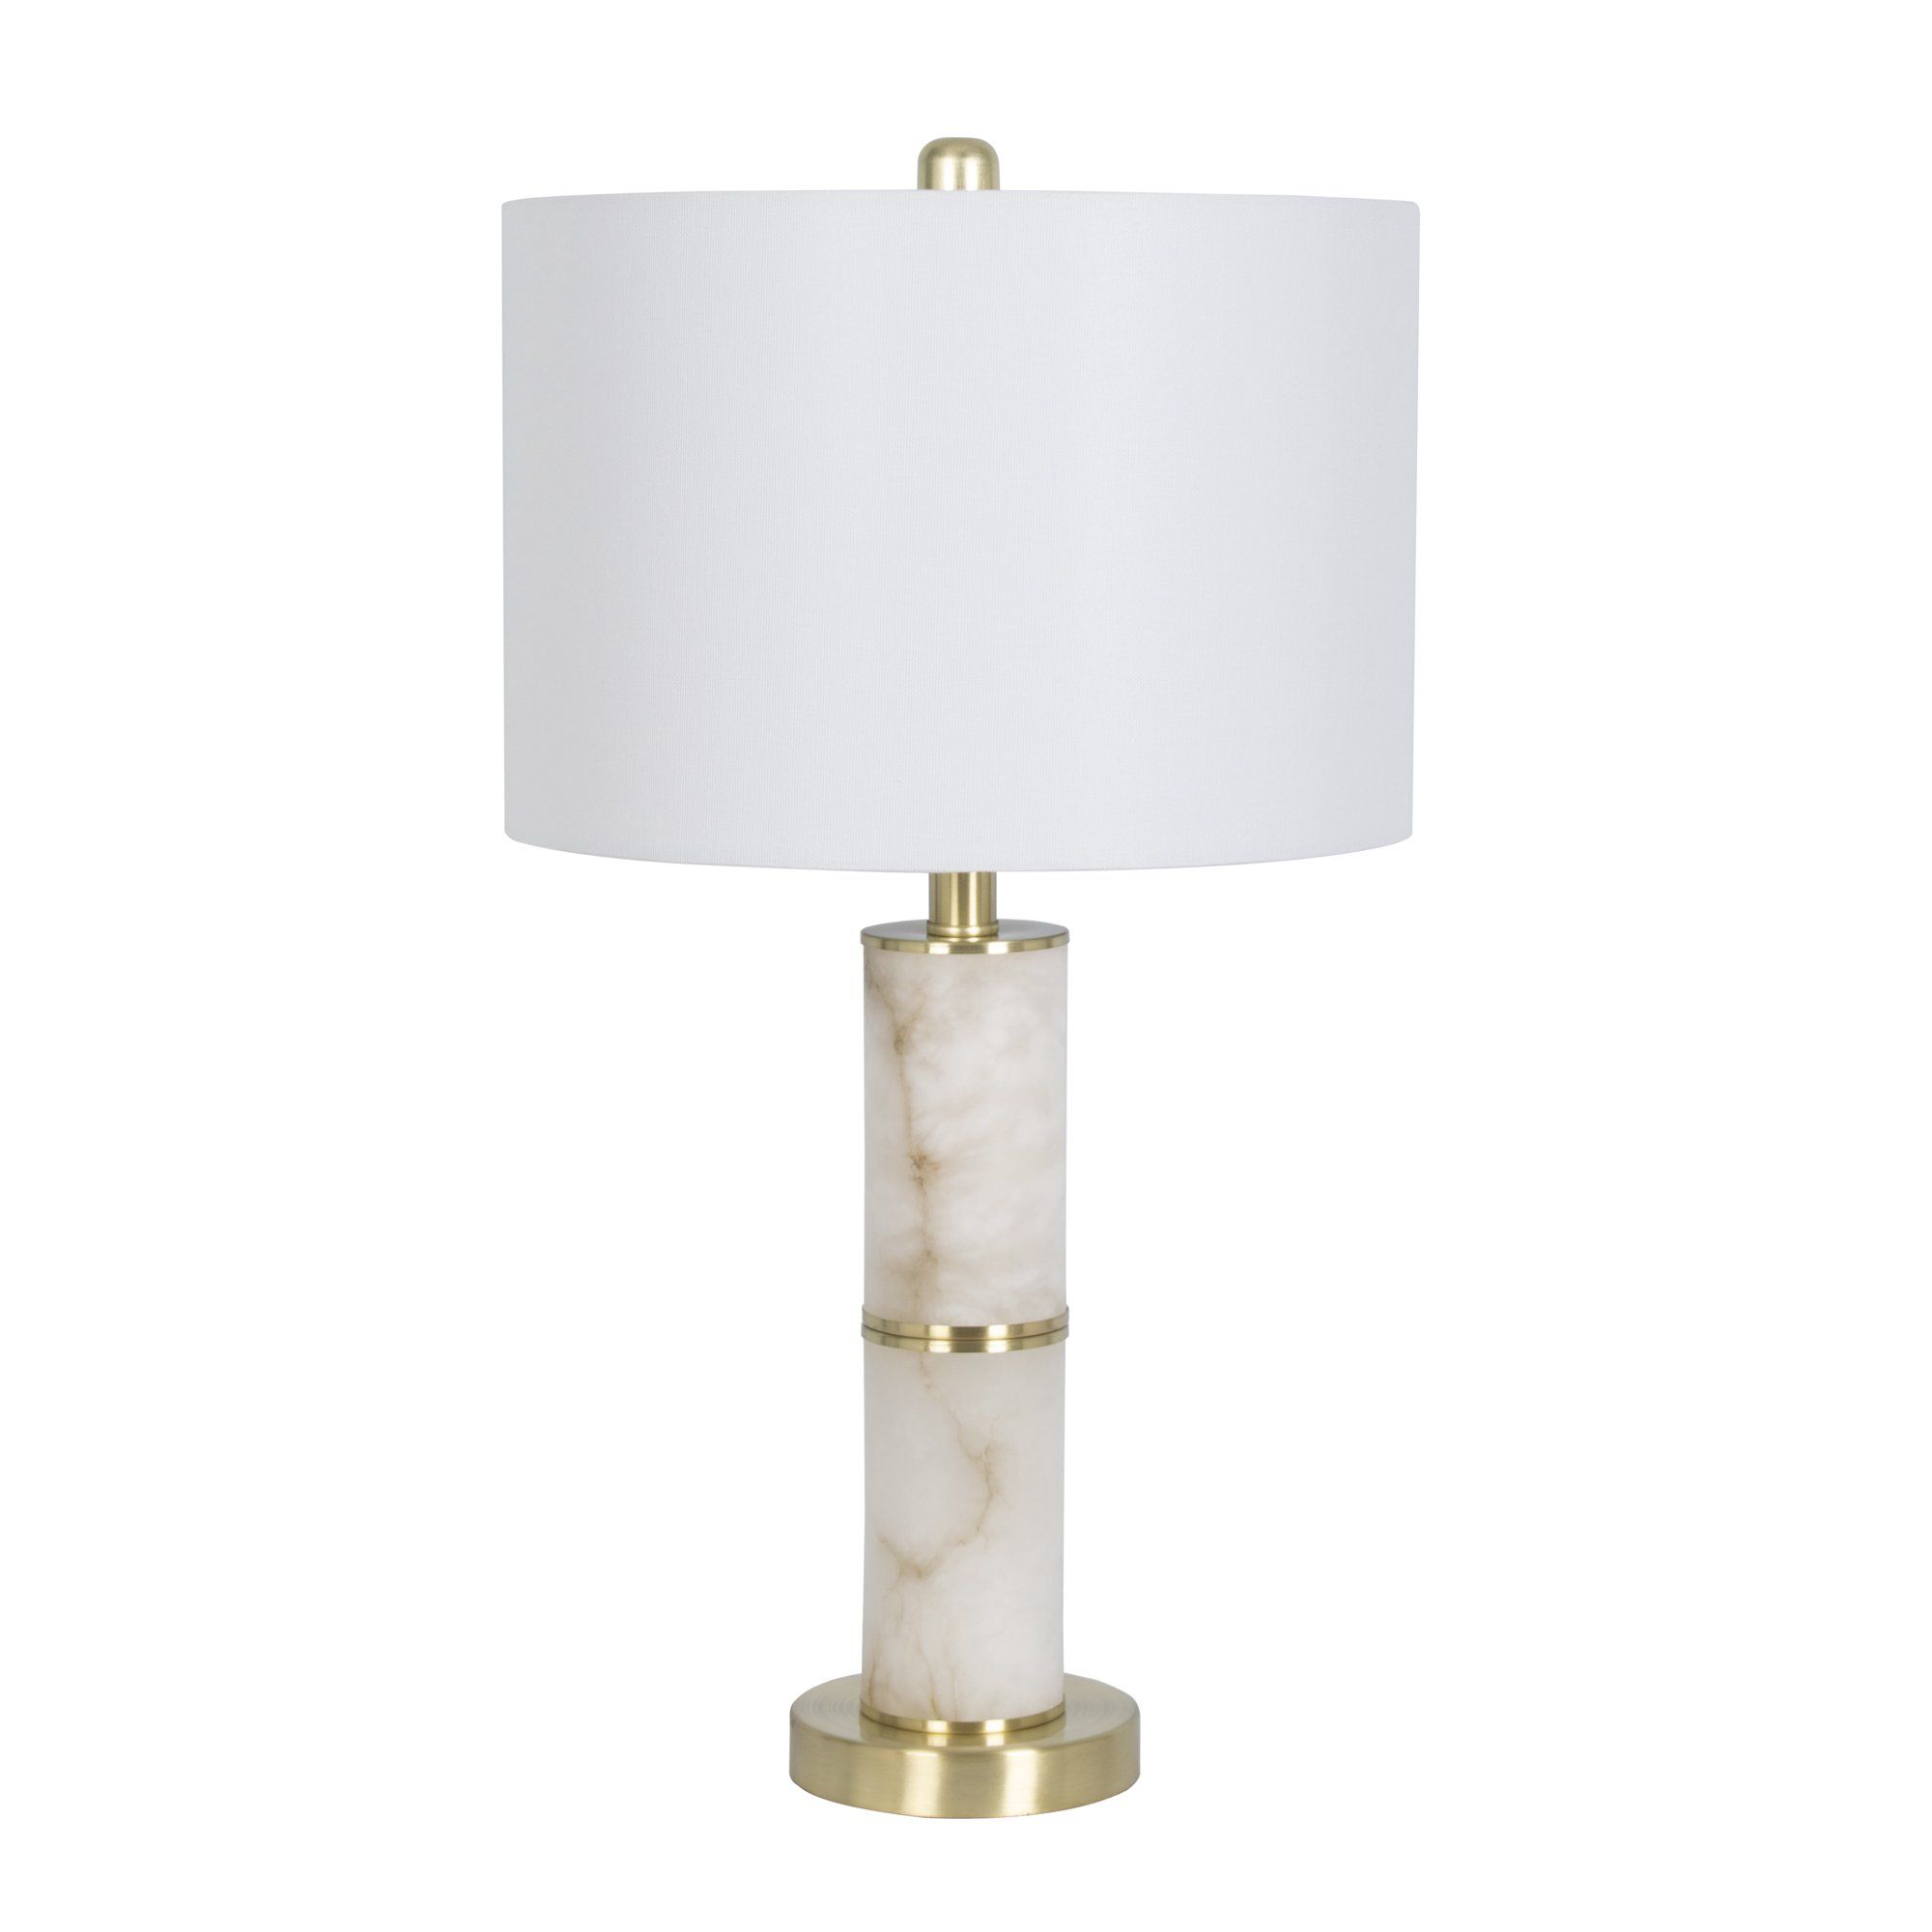 Better Homes & Gardens White Alabaster Marble Finish Table Lamp, 23.5"H | Walmart (US)